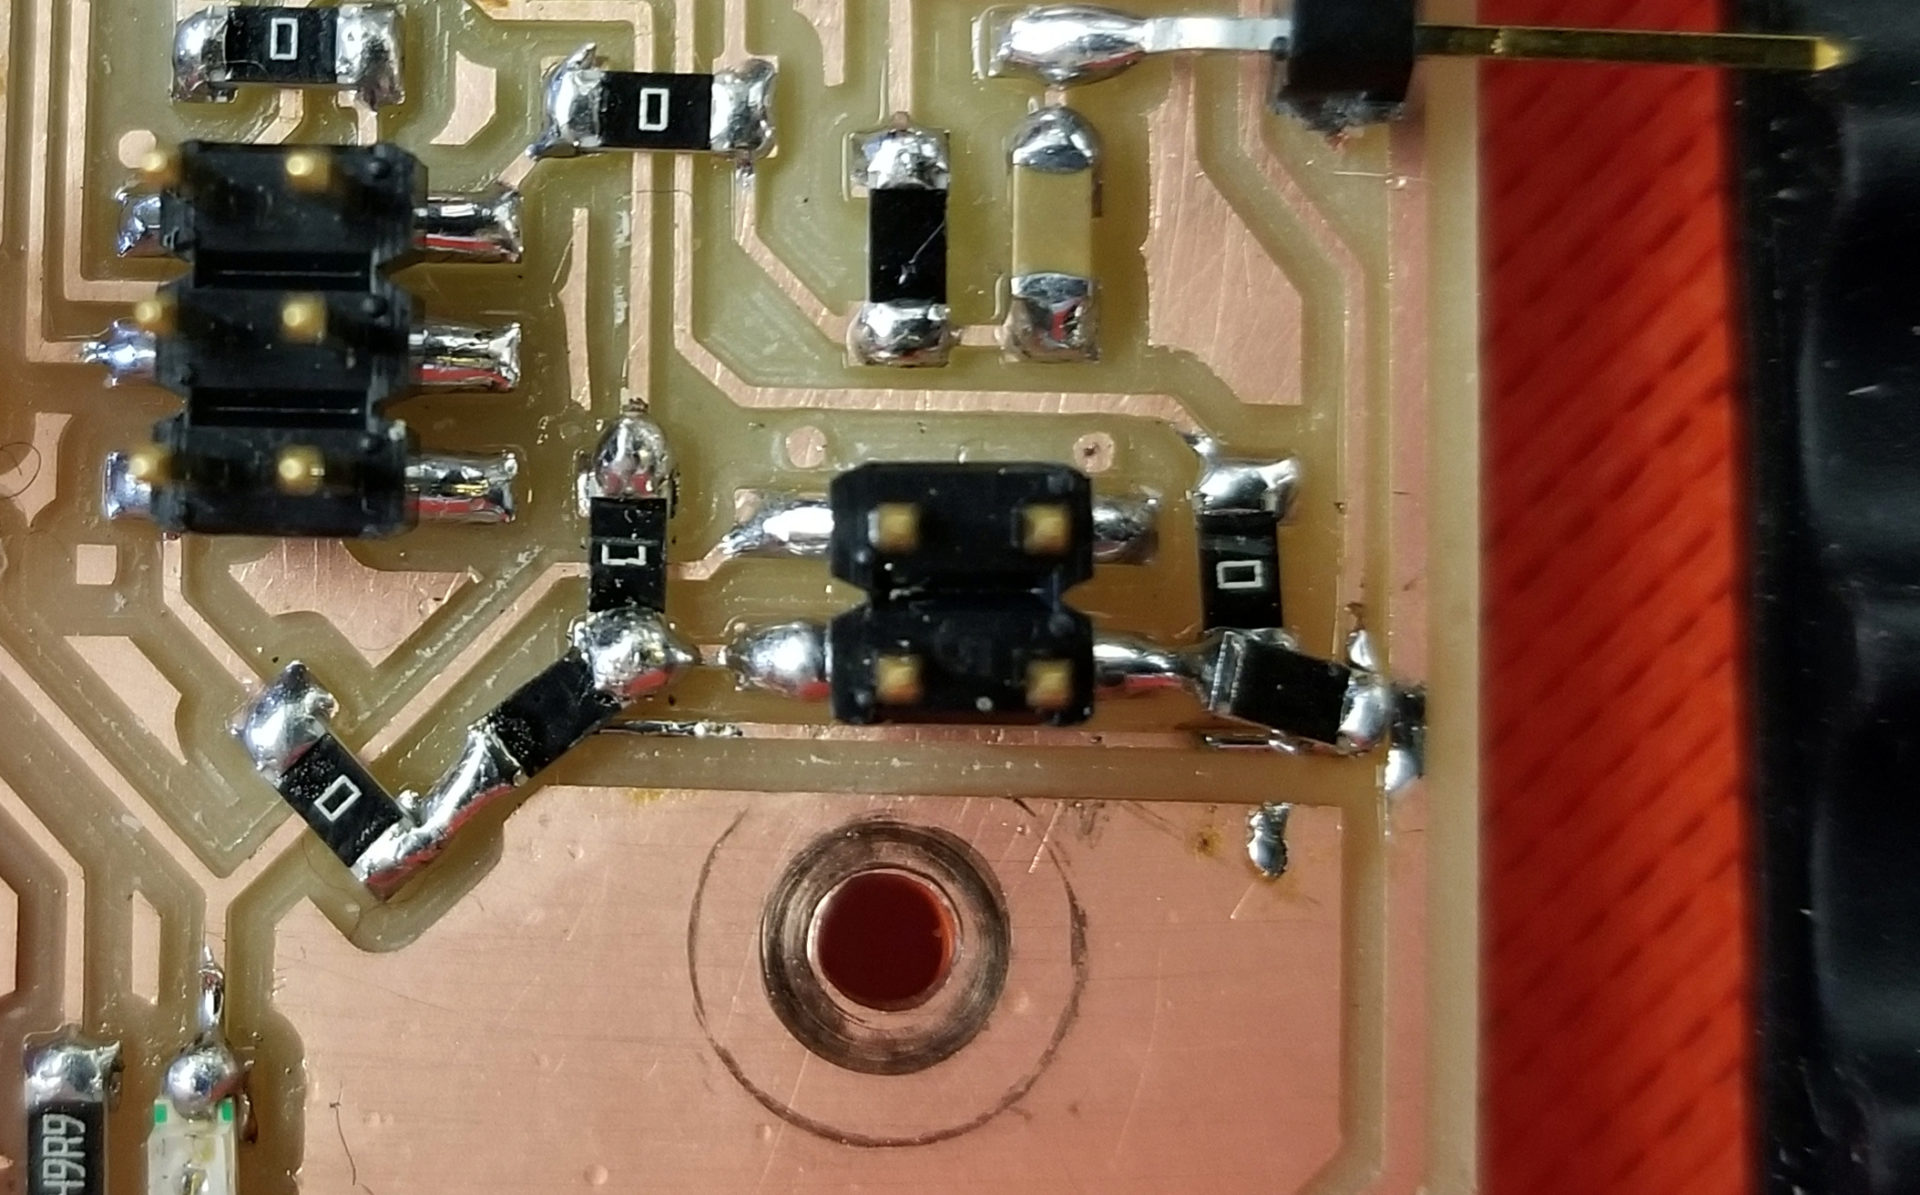 Hacky fix for phototransistor circuit